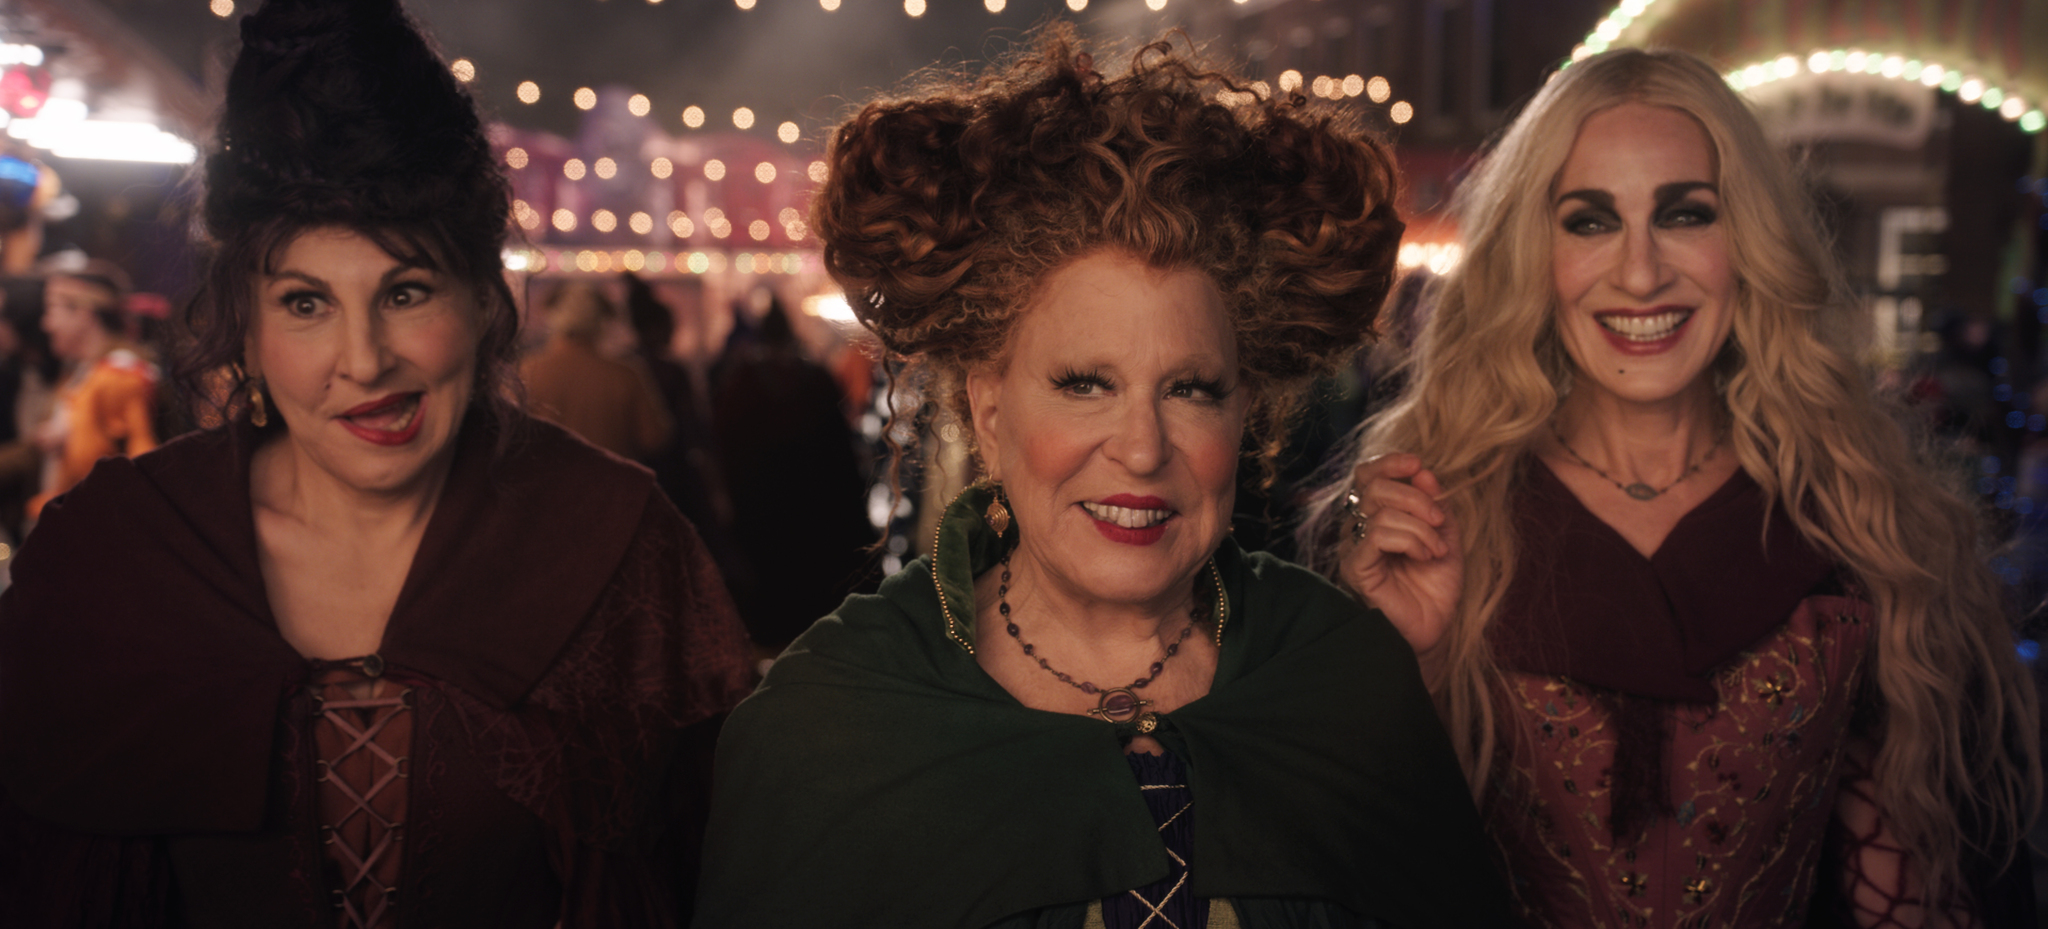 Bette Midler assures the Sanderson sisters from ‘Hocus Pocus’ will adopt your baby